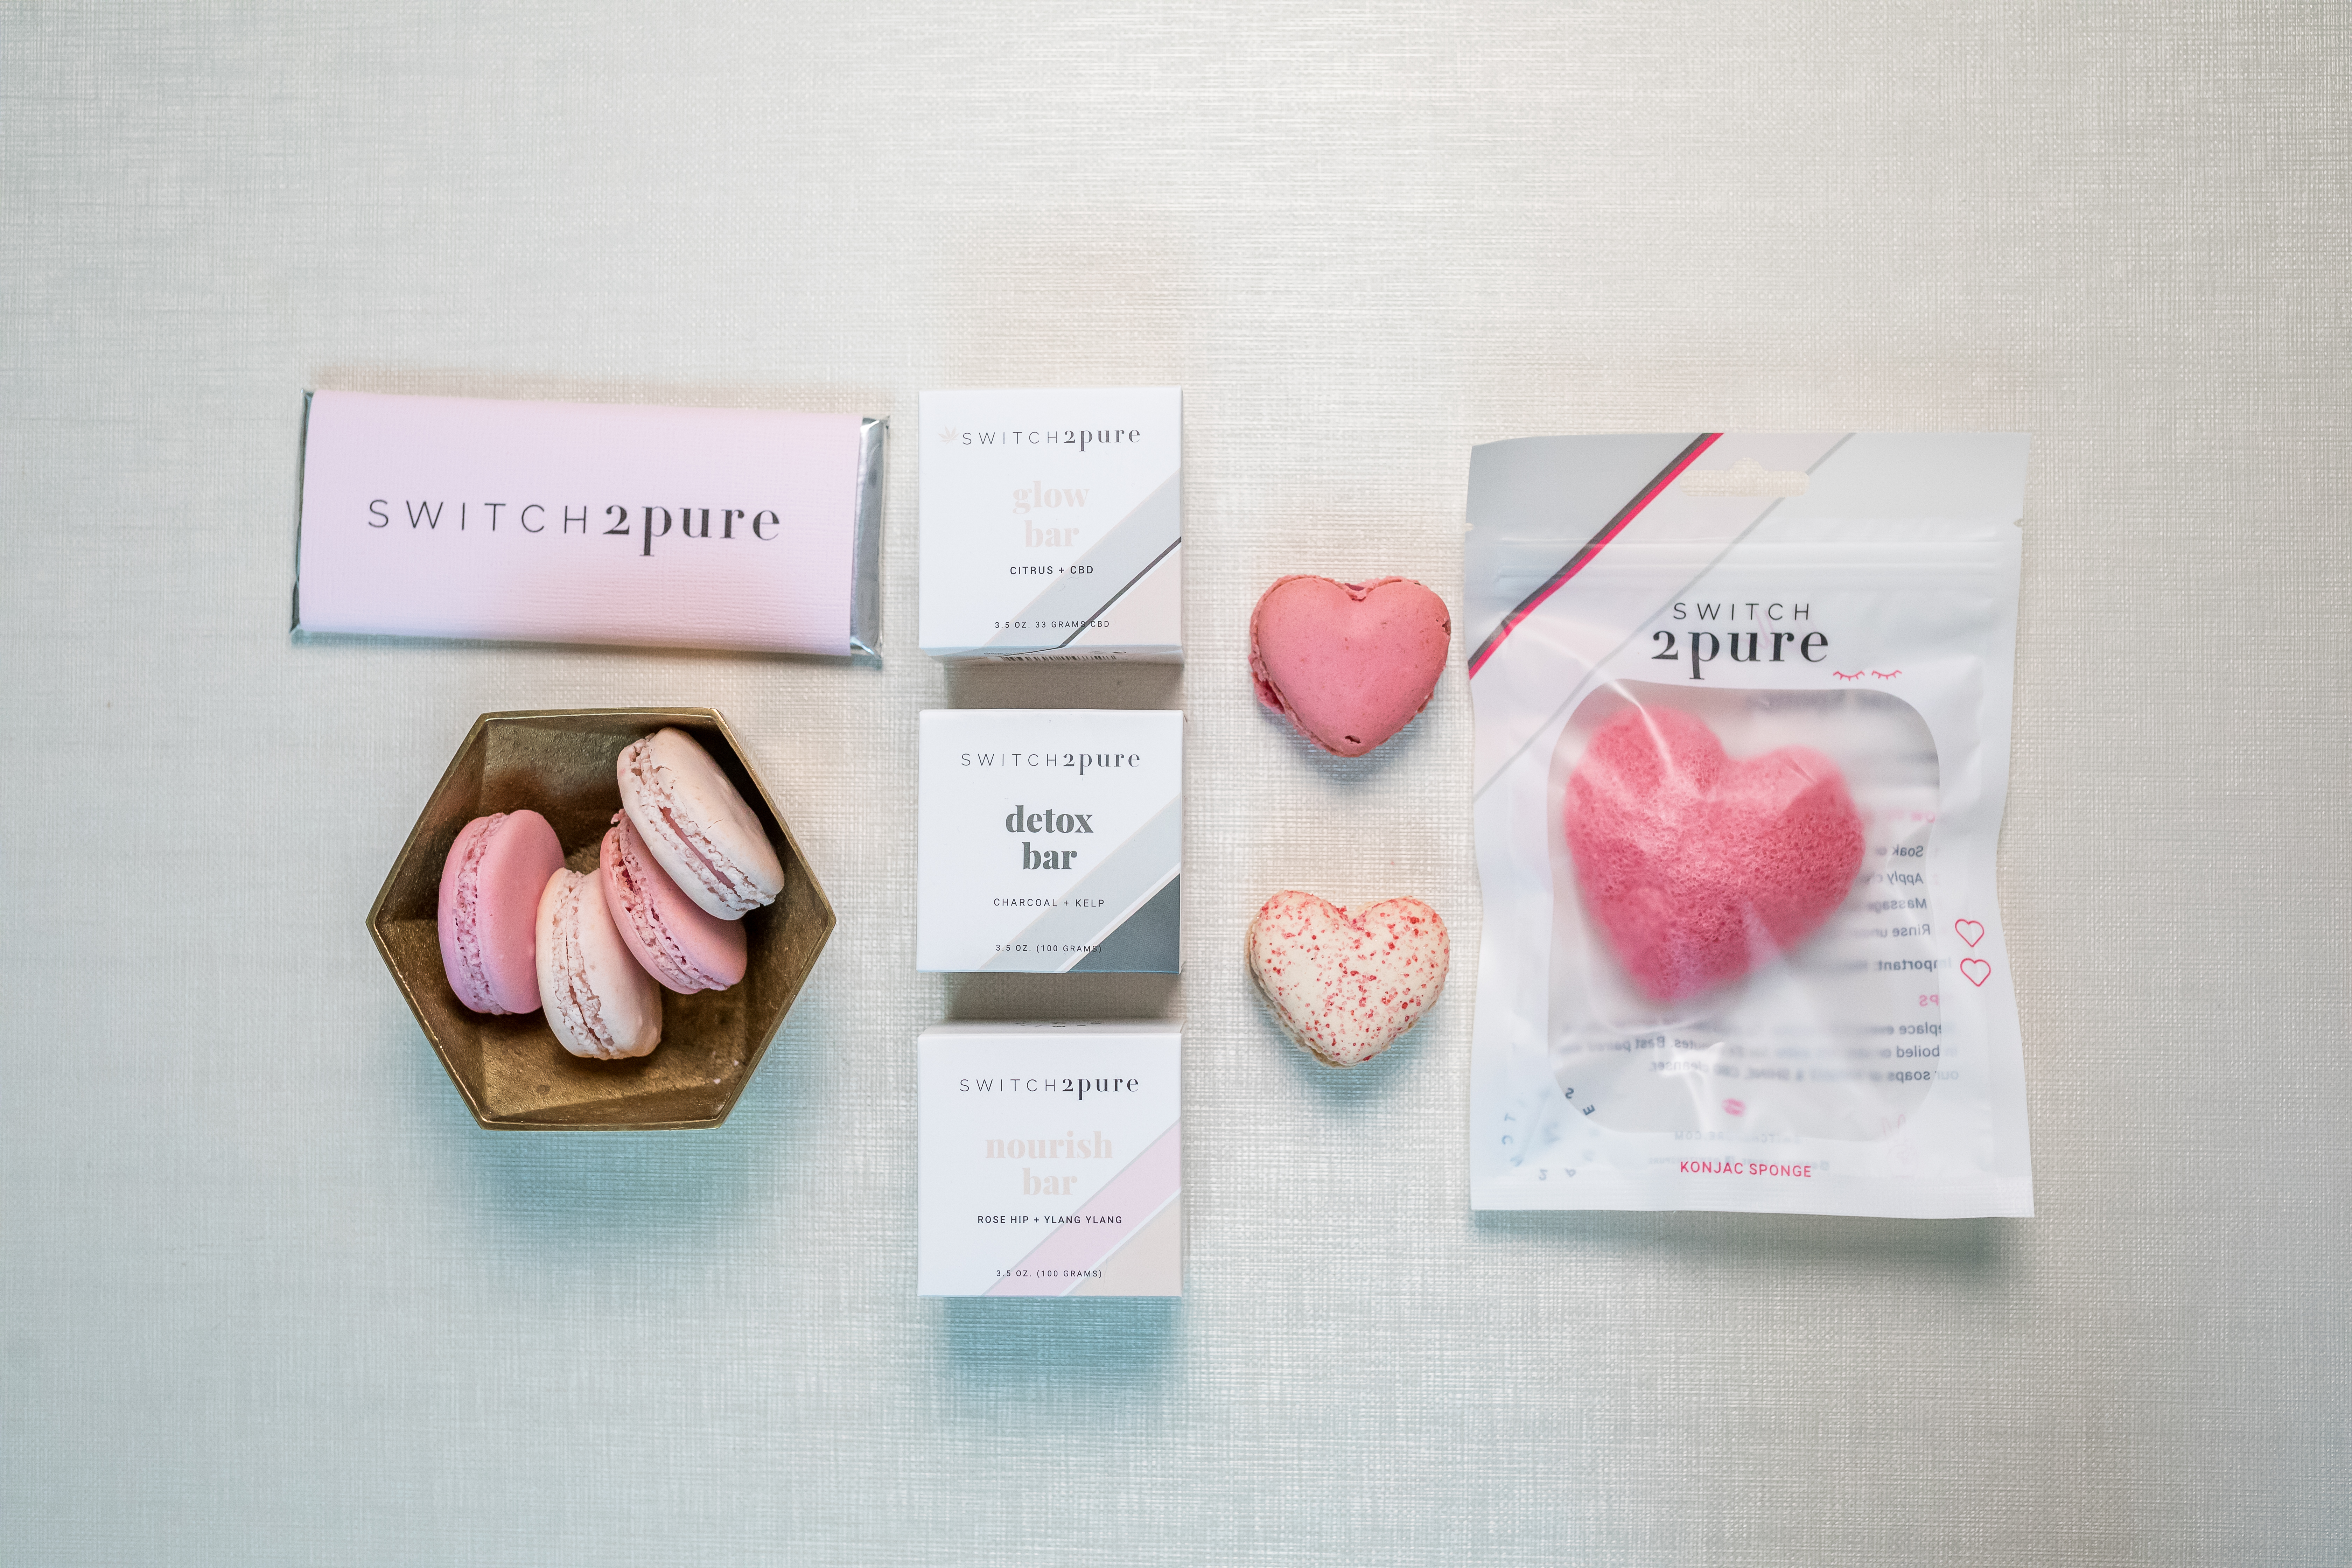 Switch2pure exfoliating konjac sponge and tip to toe soap bars